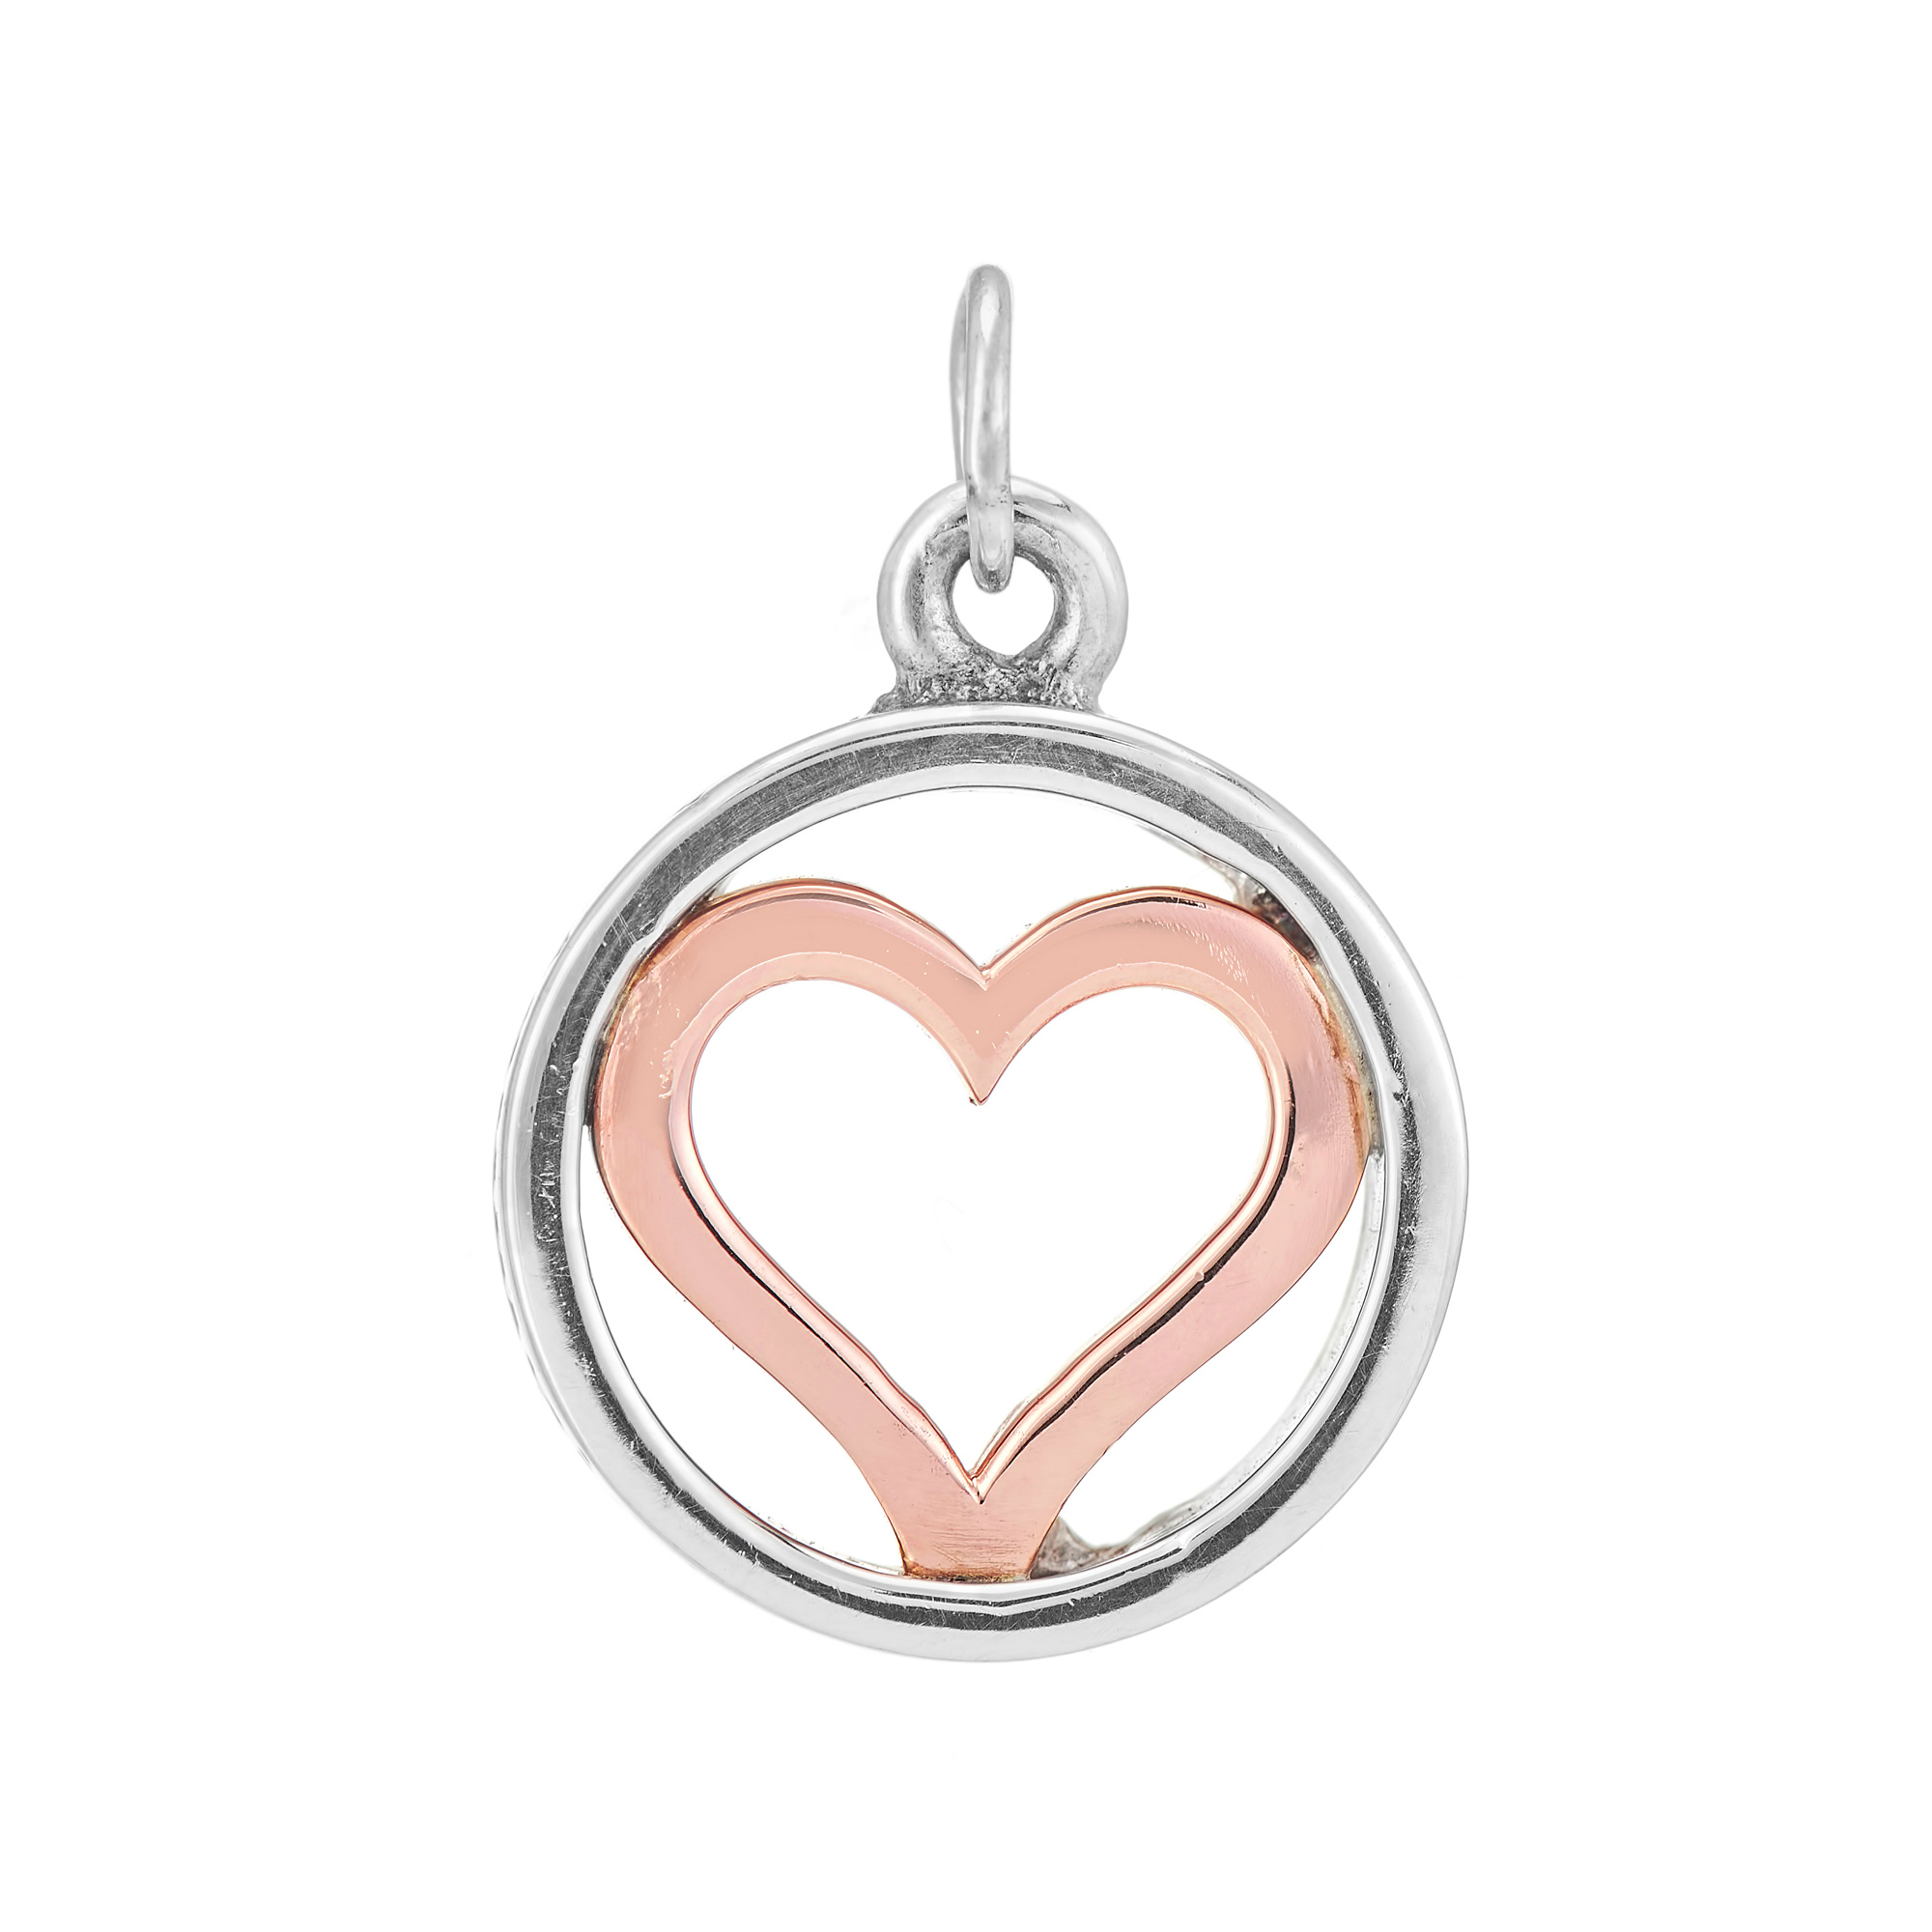 Sterling Silver and 9ct Rose Gold Charm / Pendant (Forever in my heart)